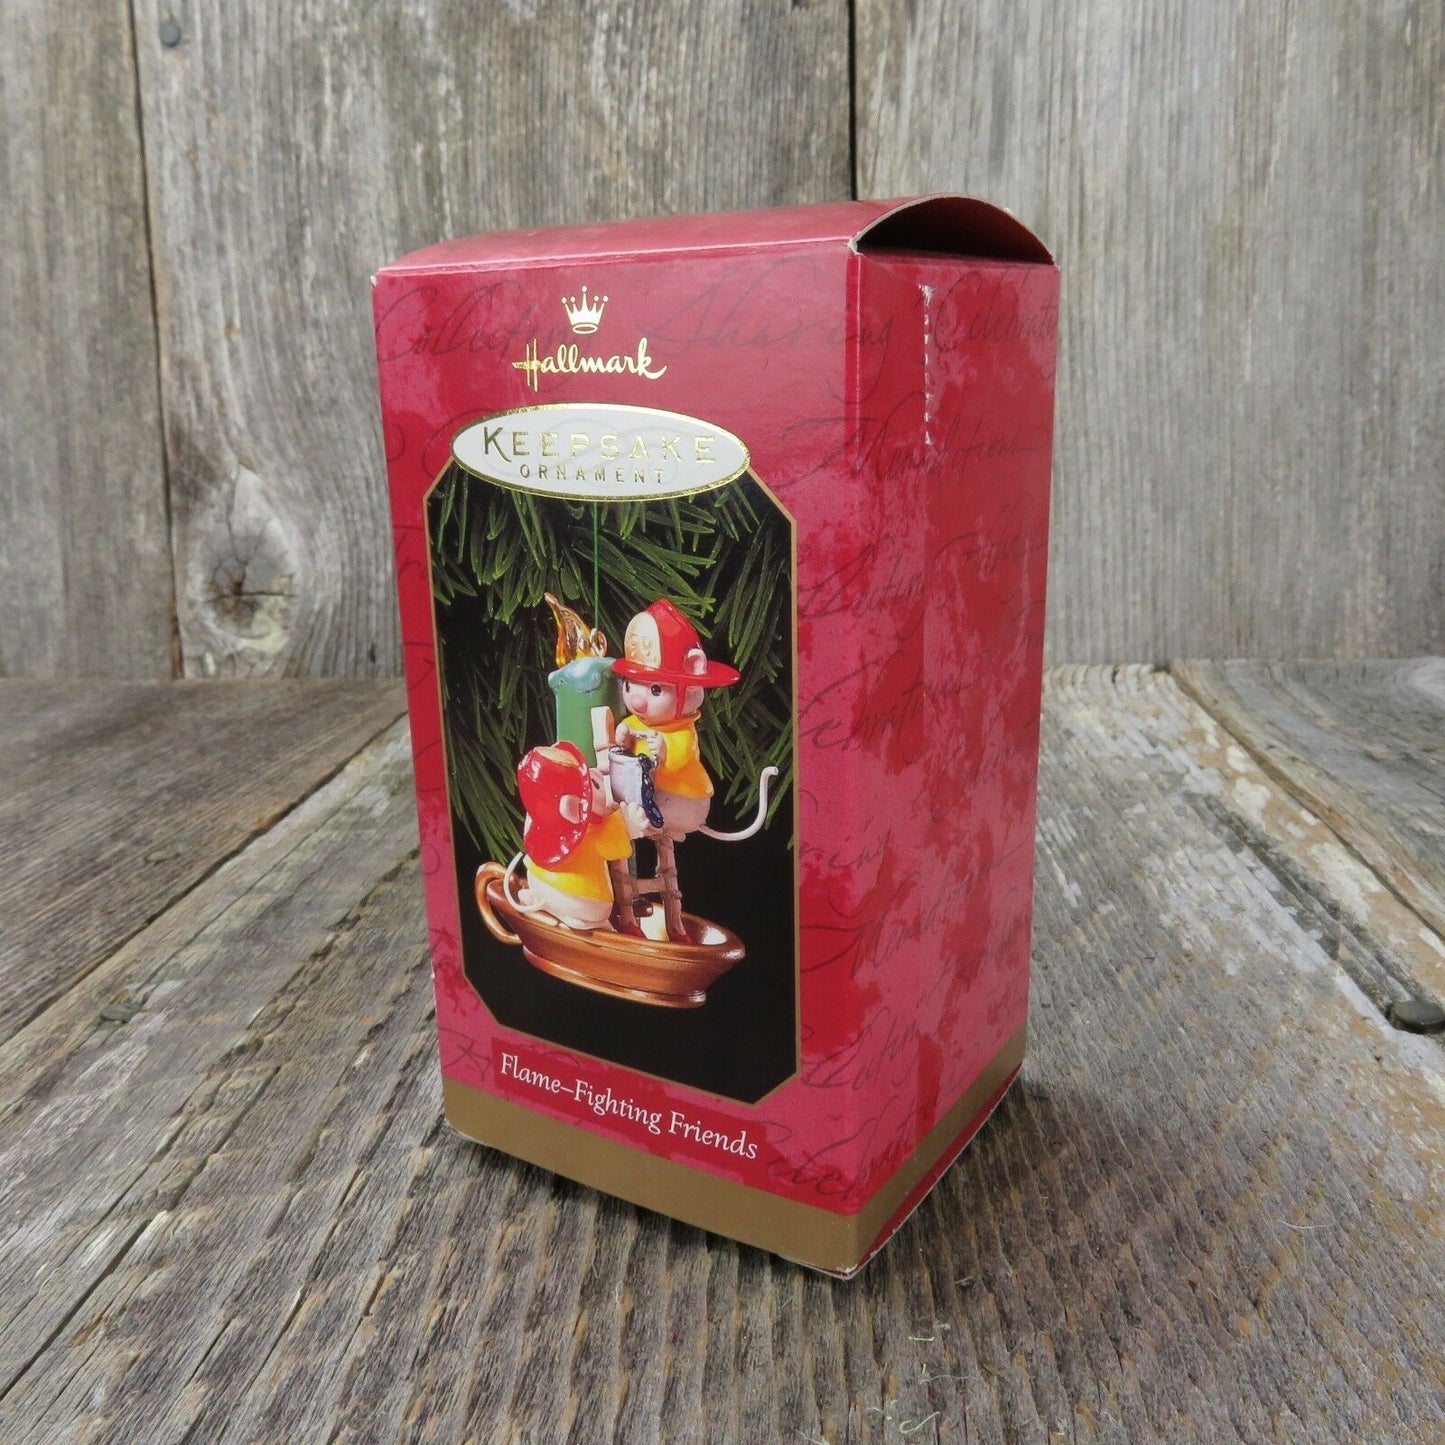 Fire Fighter Ornament Mouse Hallmark Flame Fighting Friends Christmas Candle - At Grandma's Table